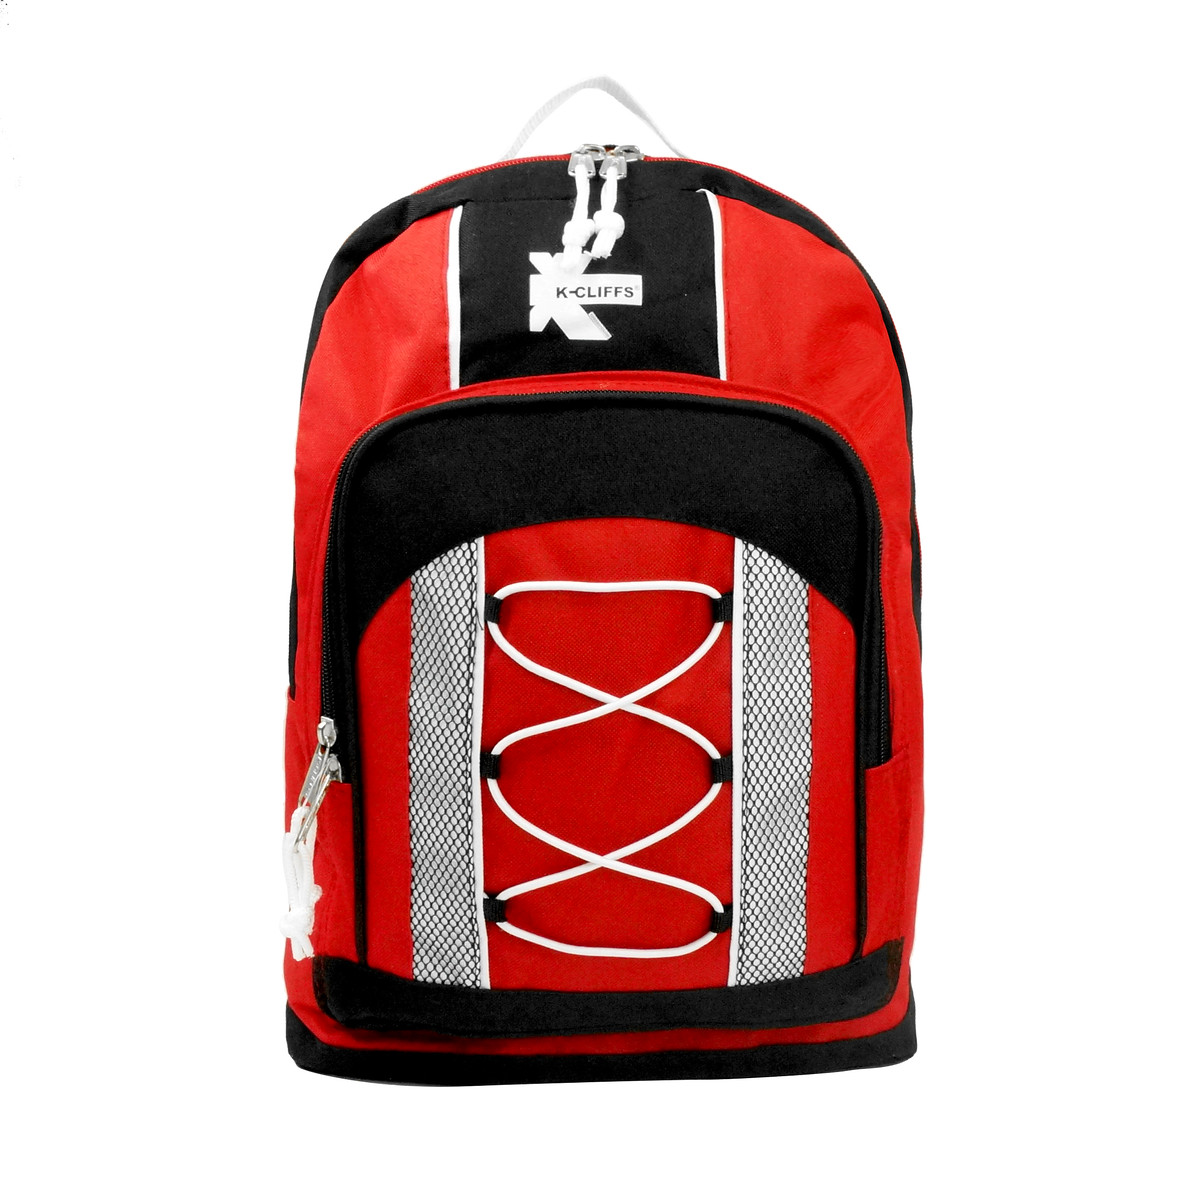 K-Cliffs 15" Lightweight Backpack, Daypack Bungee Water Resistant for Travel School and College, Unisex Color for Casual Everyday Kids & Teens (Red) - image 5 of 7